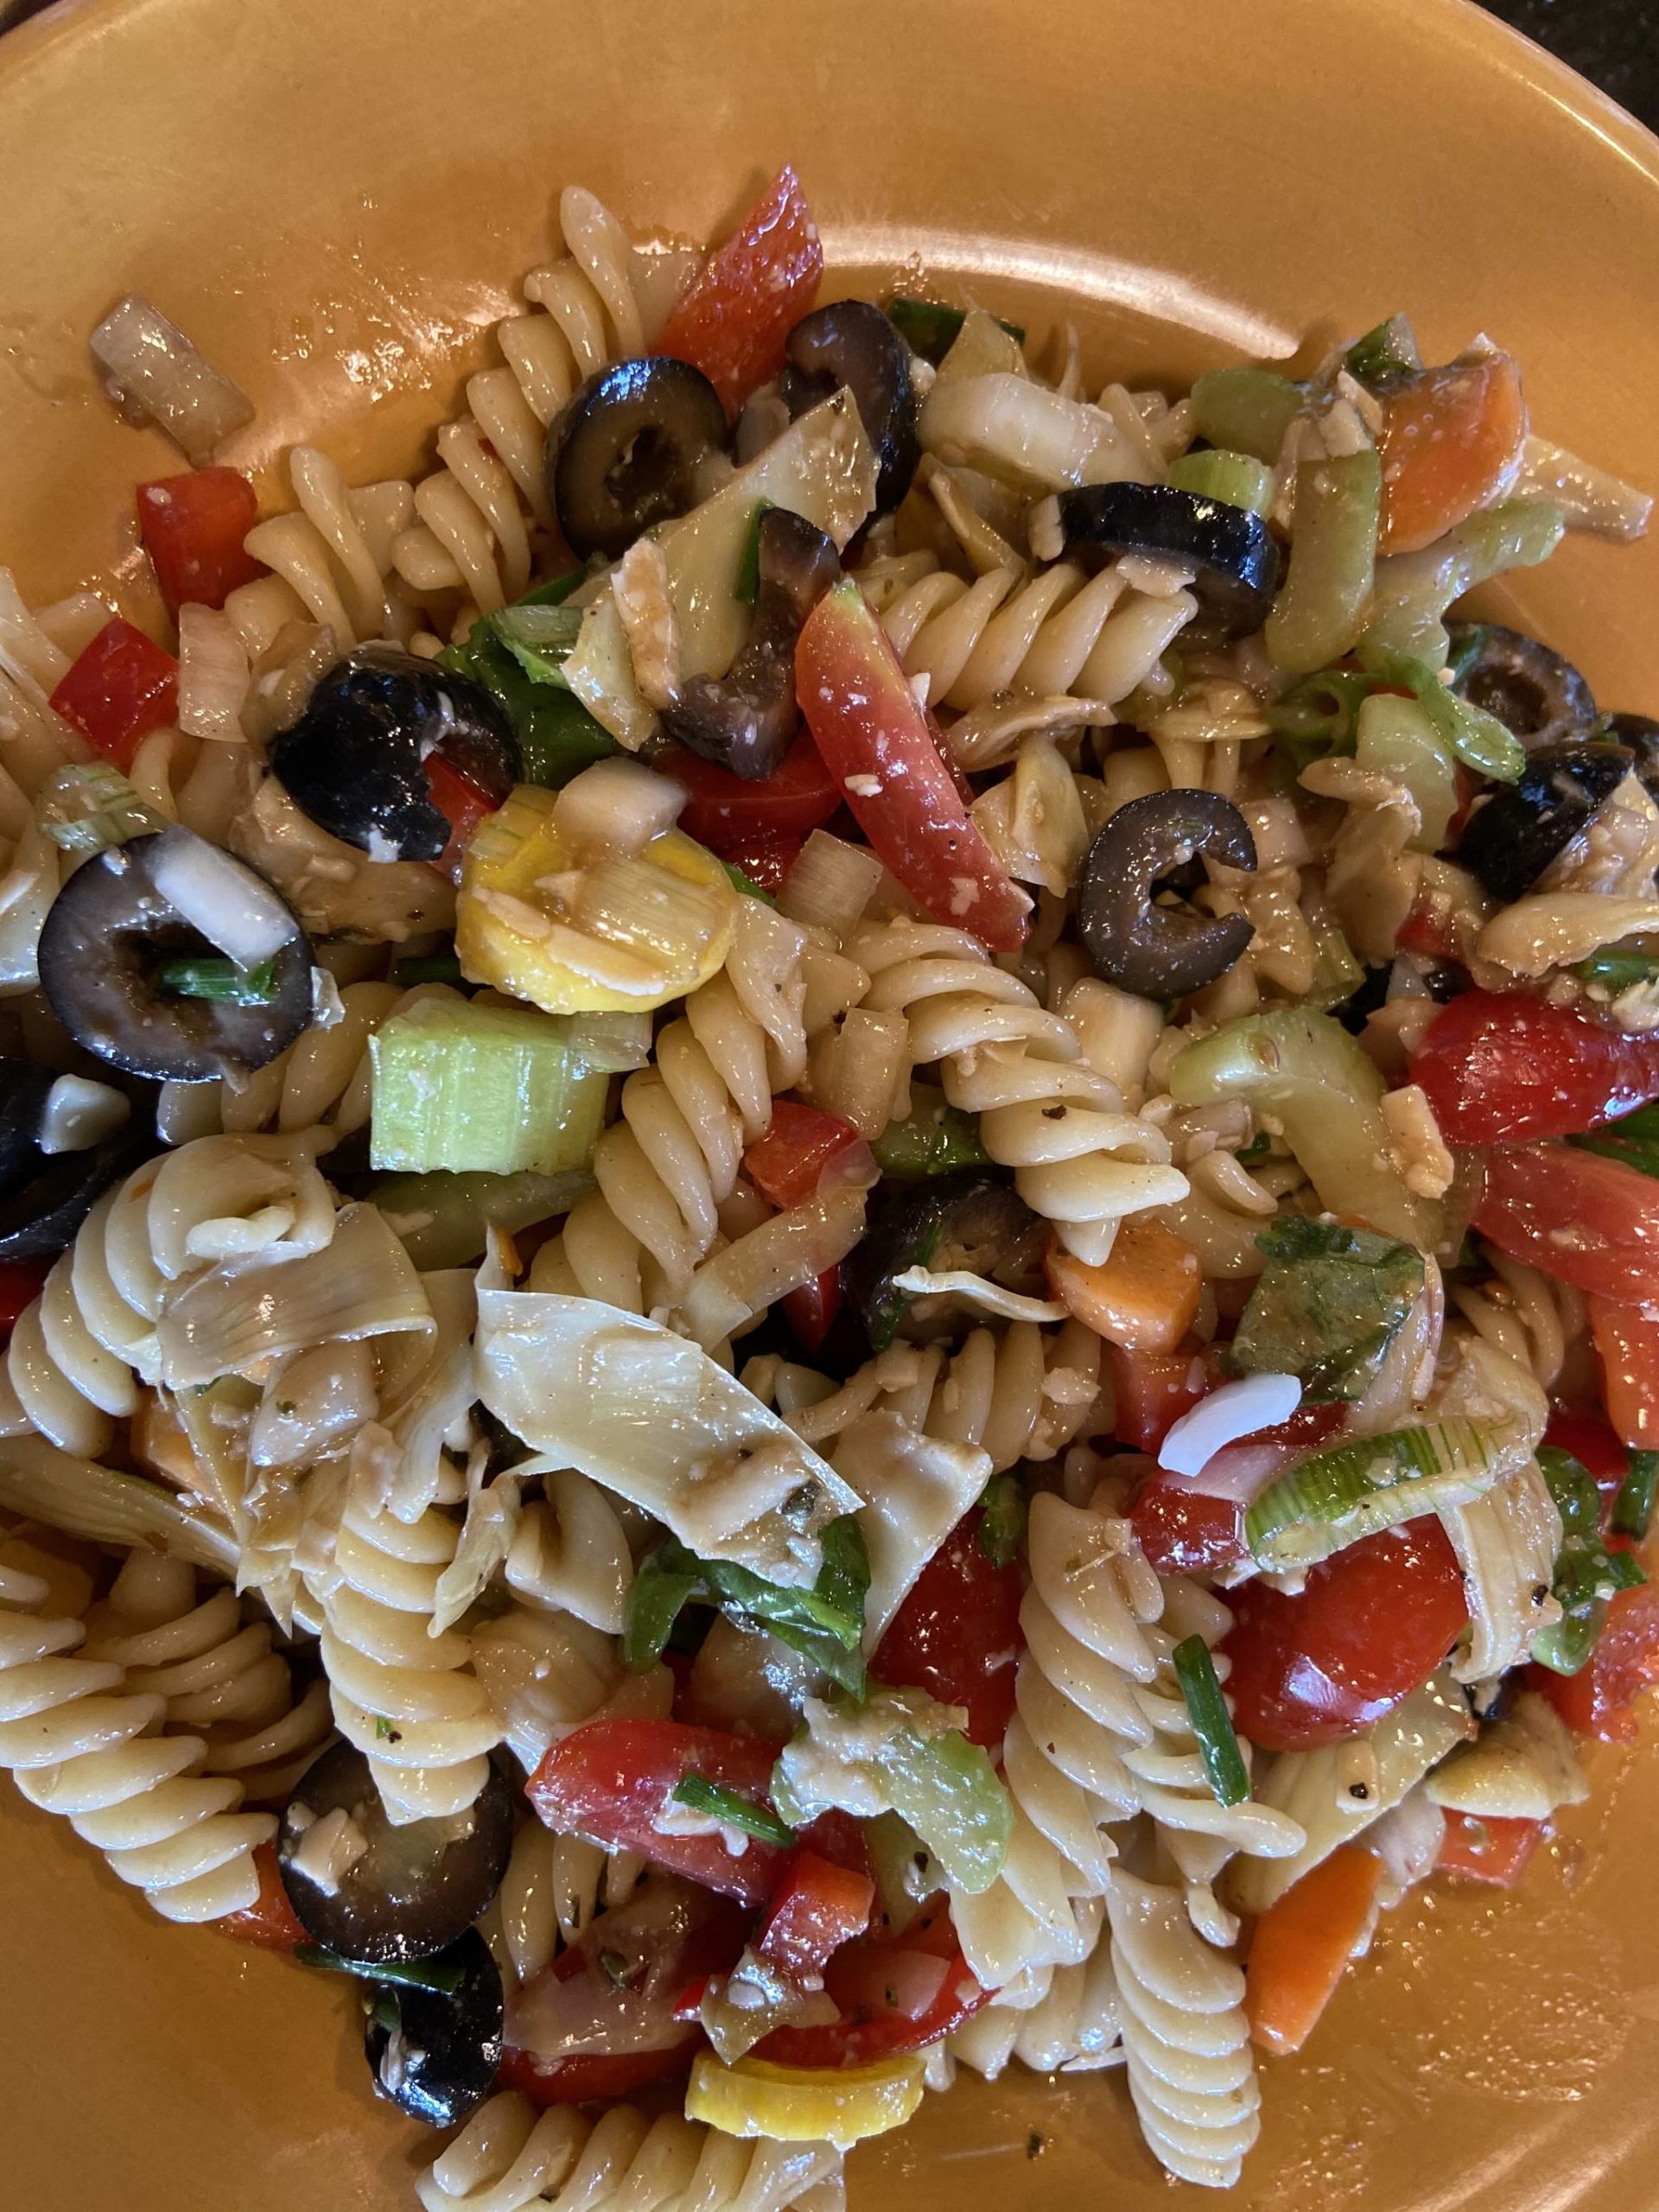 Farmers Market Pasta Salad is photographed in Homer, Alaska, in July 2020. (Photo by Teri Robl/Homer News)